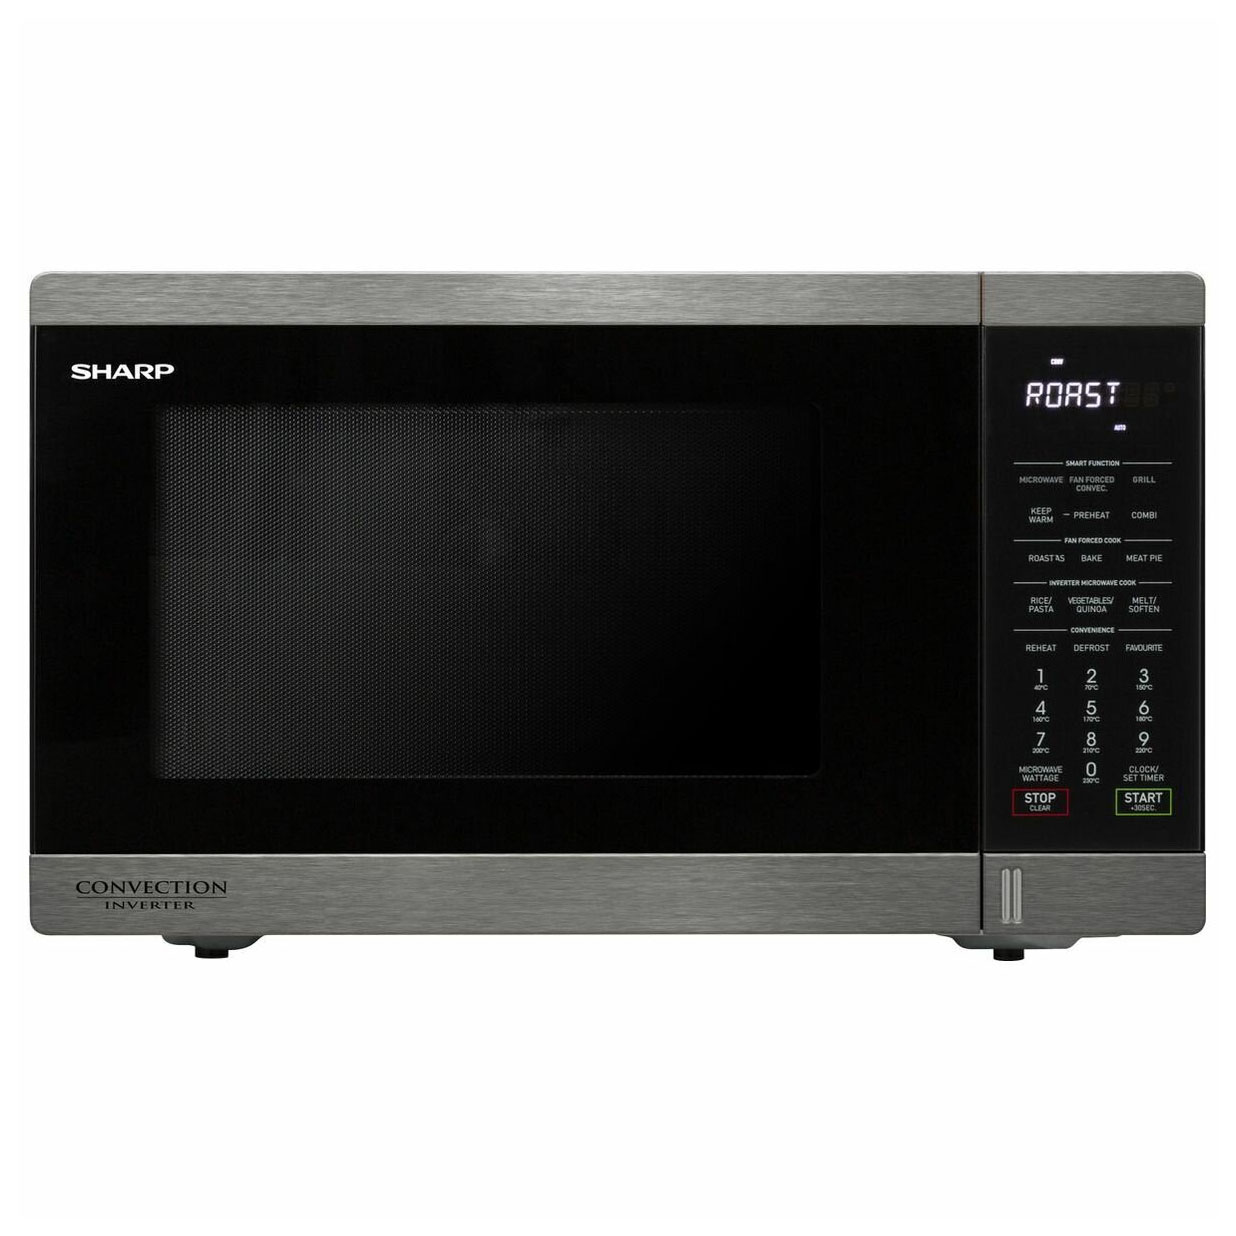 SHARP 32 Liter Inverter Grill & Convection Microwave Oven R-890E(BS)